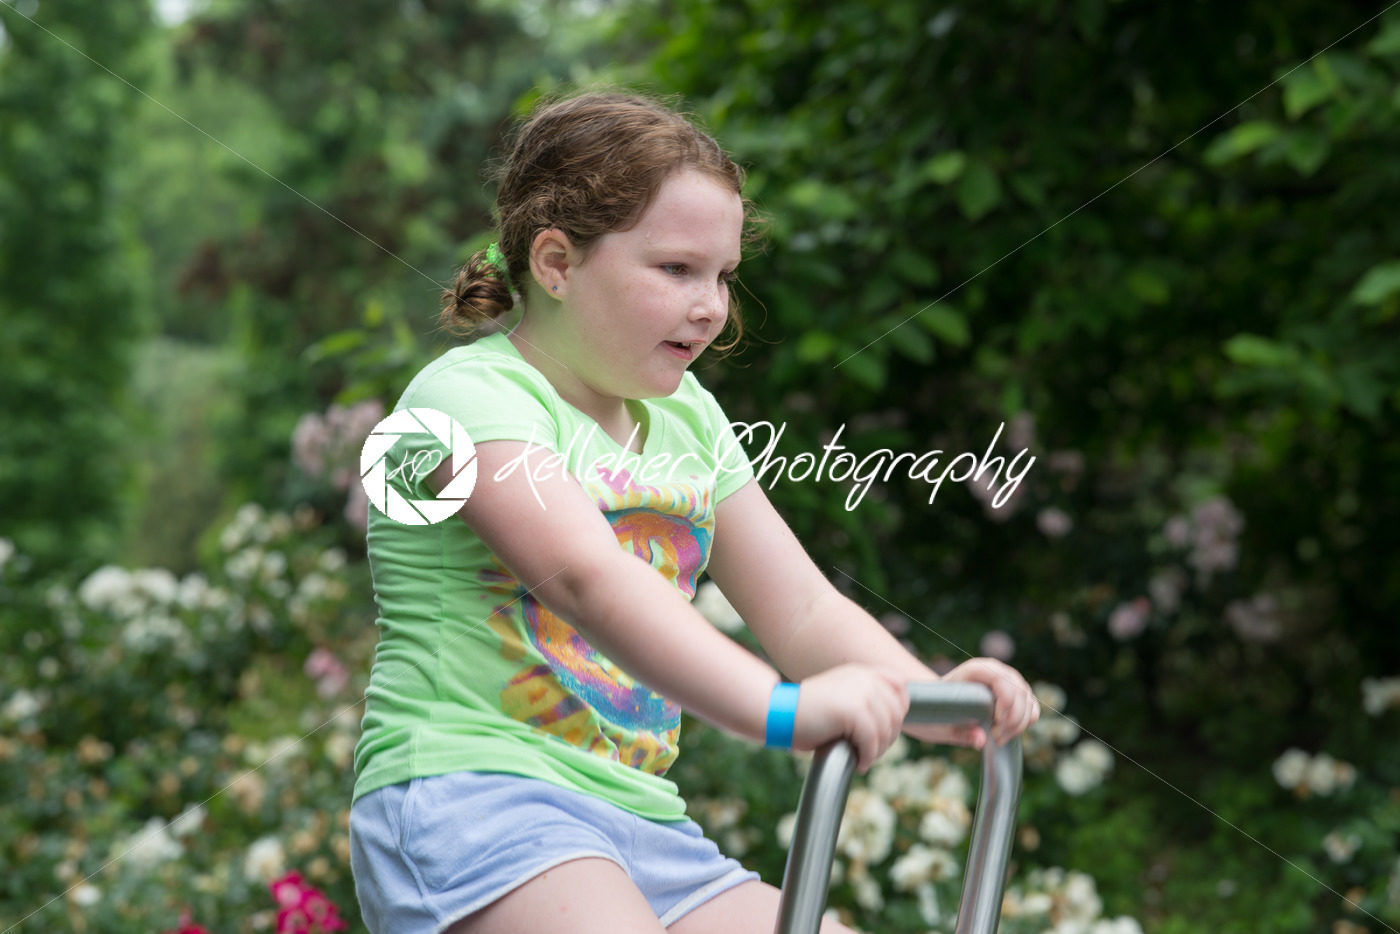 Young girl sat on ride in park - Kelleher Photography Store